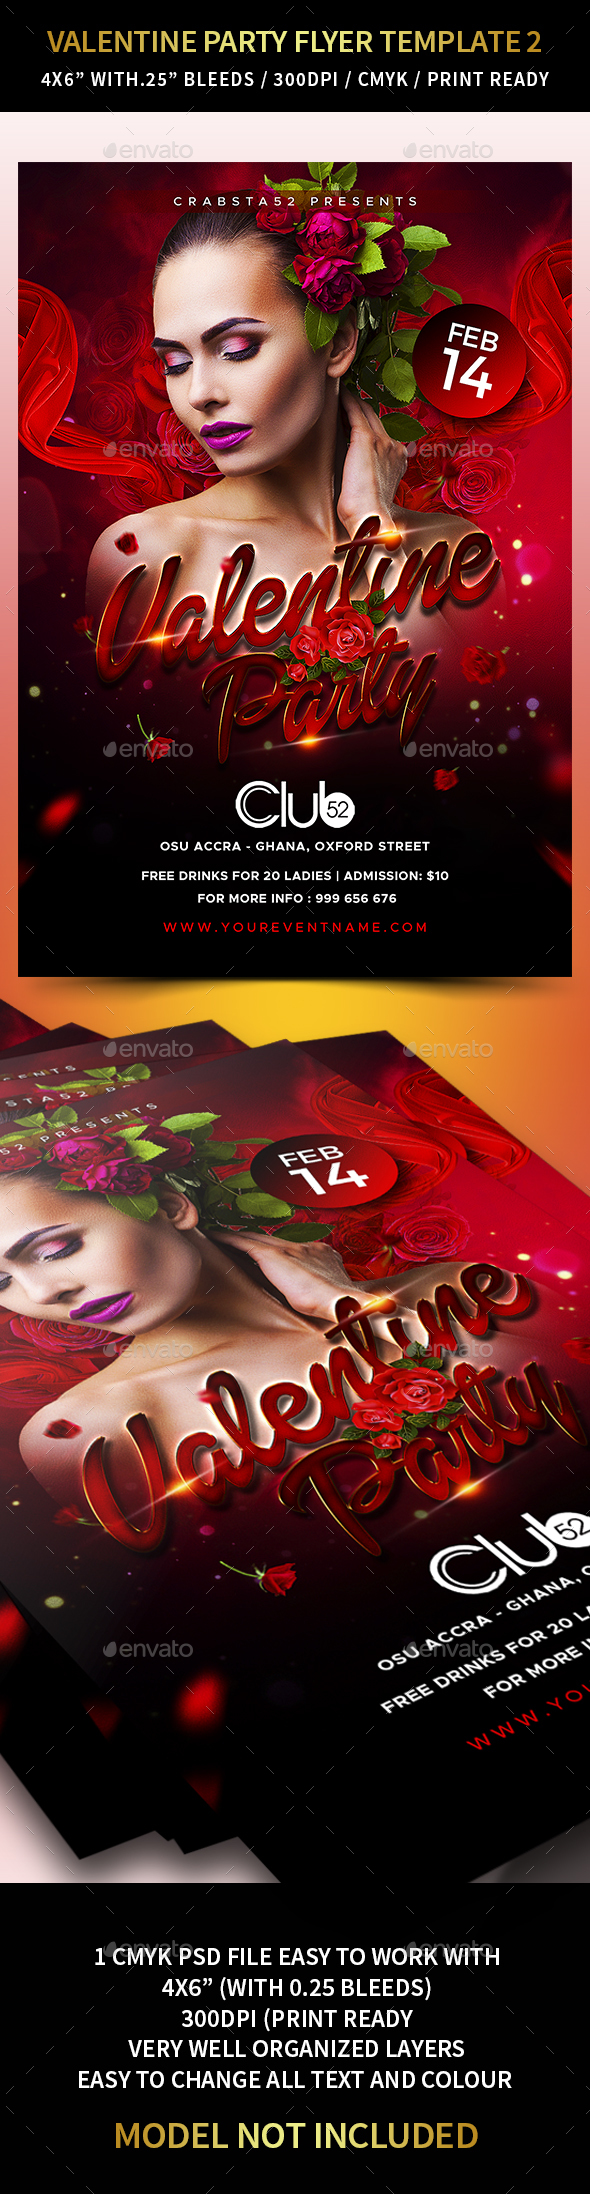 Valentine Party Flyer Template 2